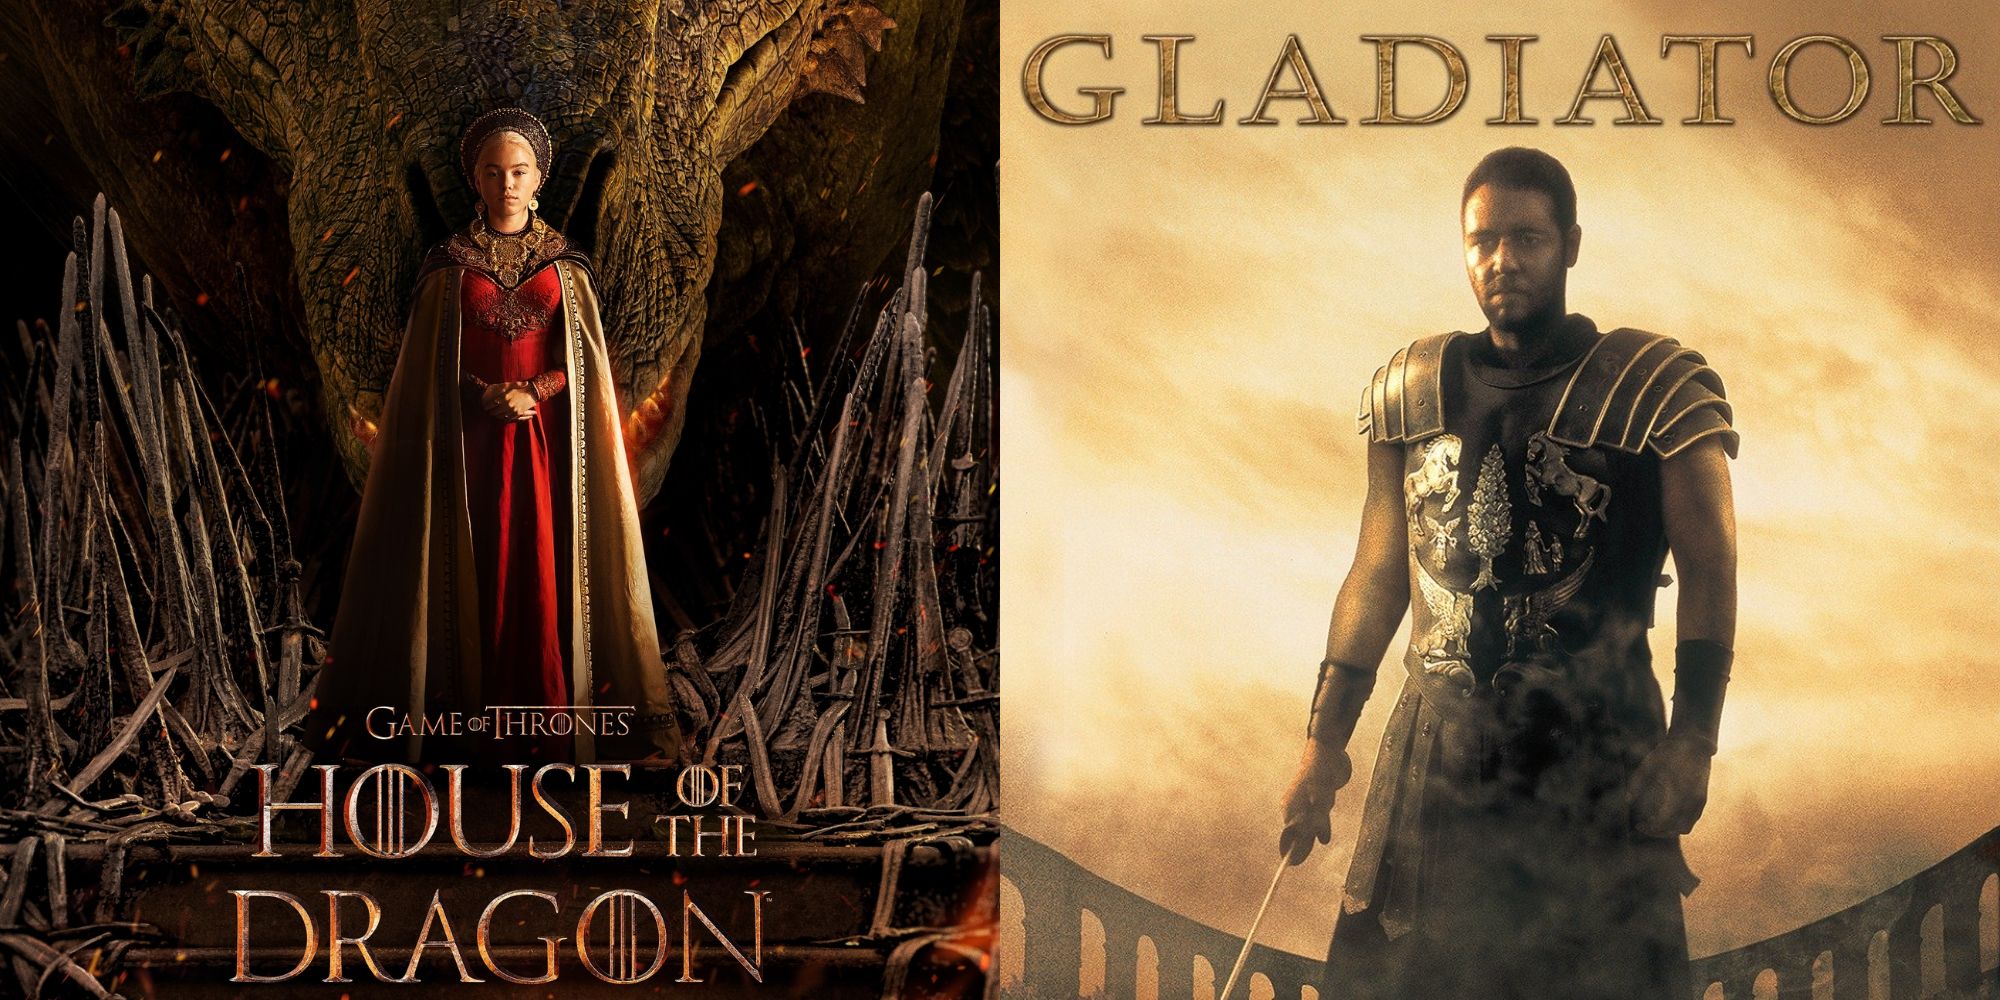 Split image showing posters for House of the Dragon and Gladiator.